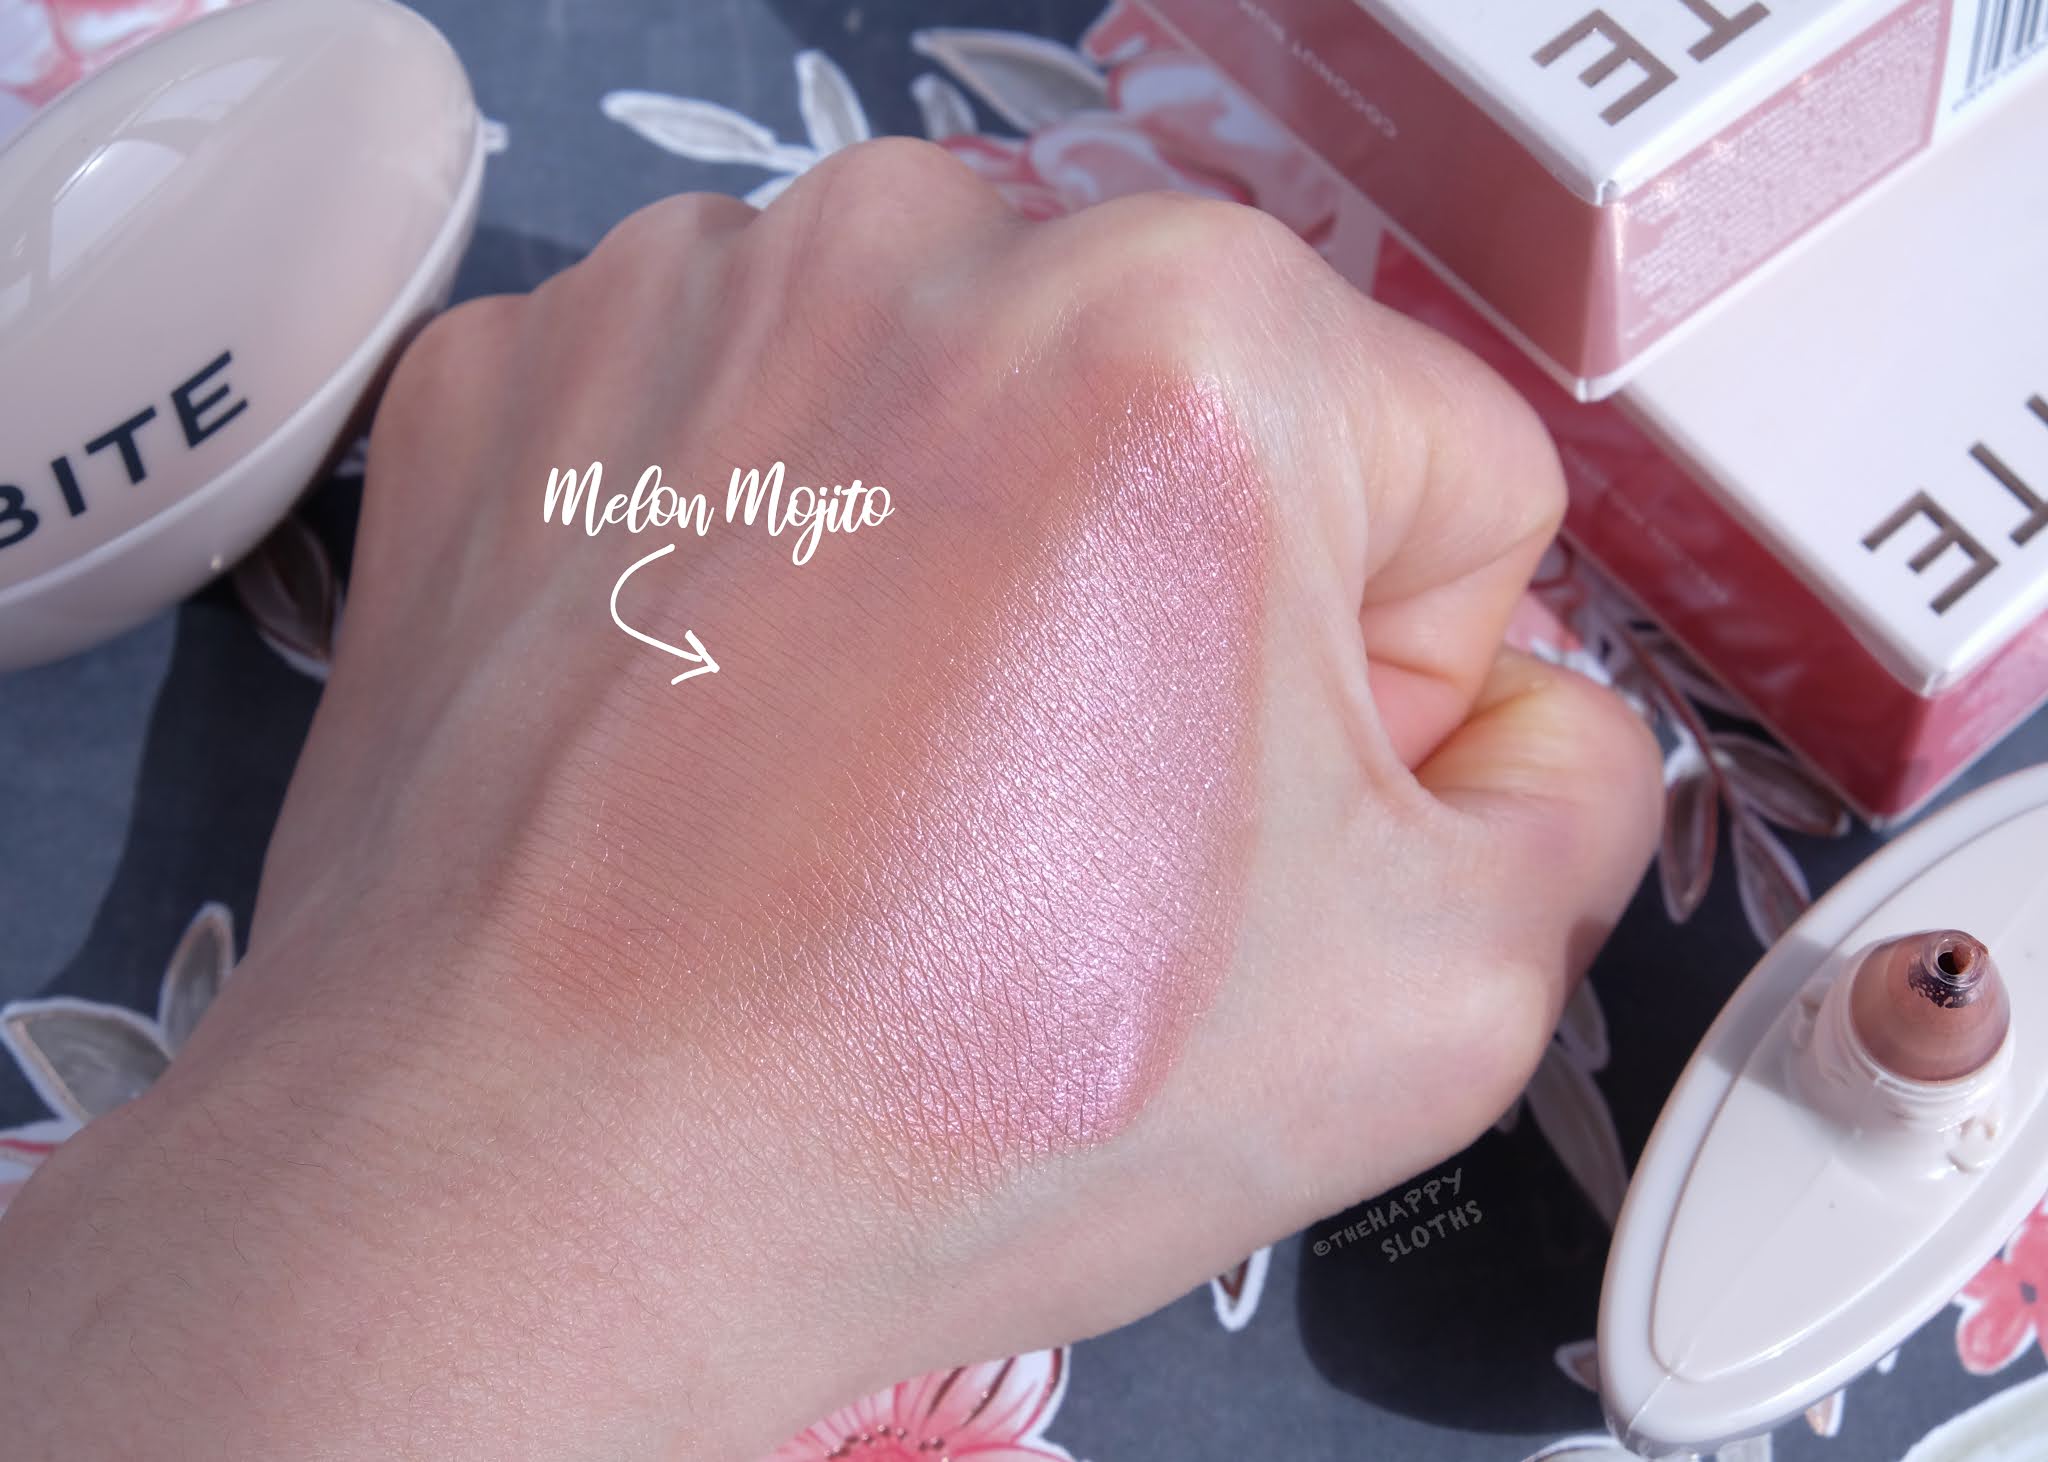 Bite Beauty | Daycation Whipped Blush in "Melon Mojito": Review and Swatches